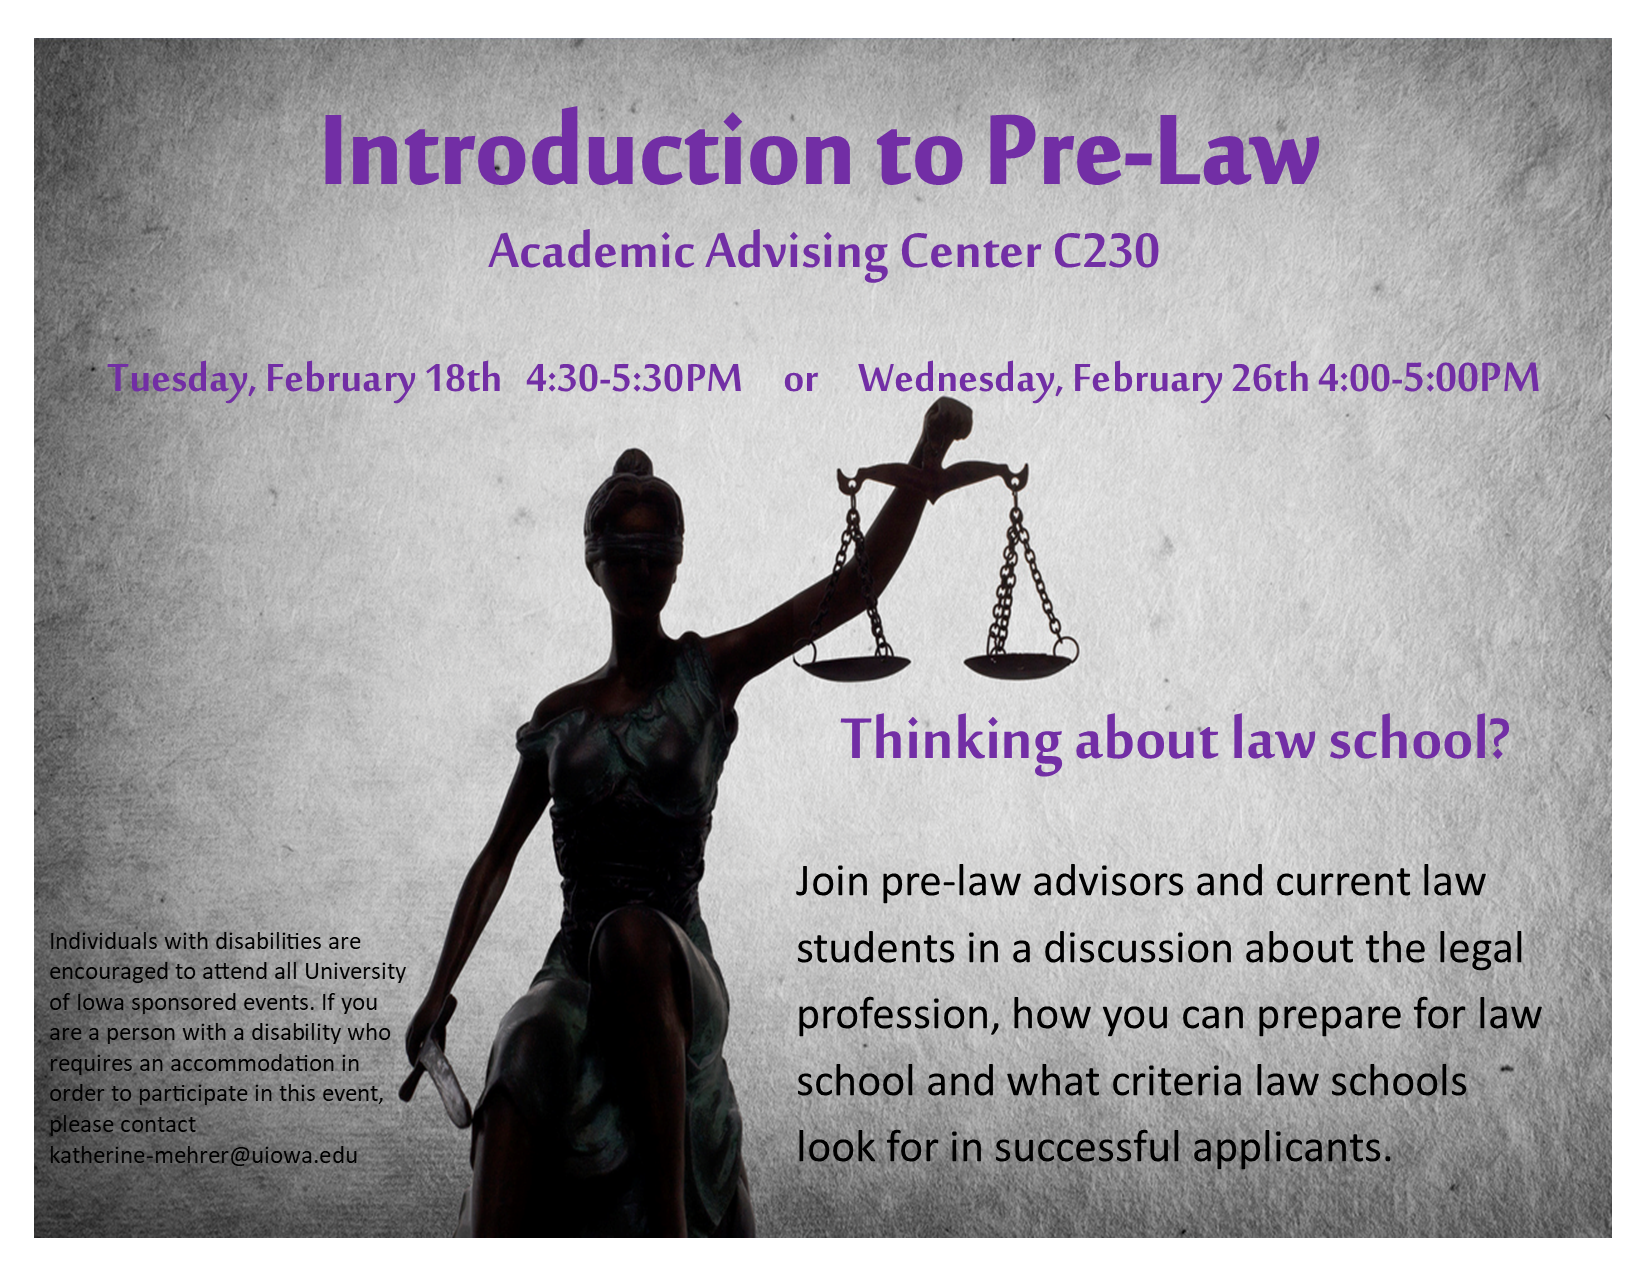 Intro to Pre-Law Session Information